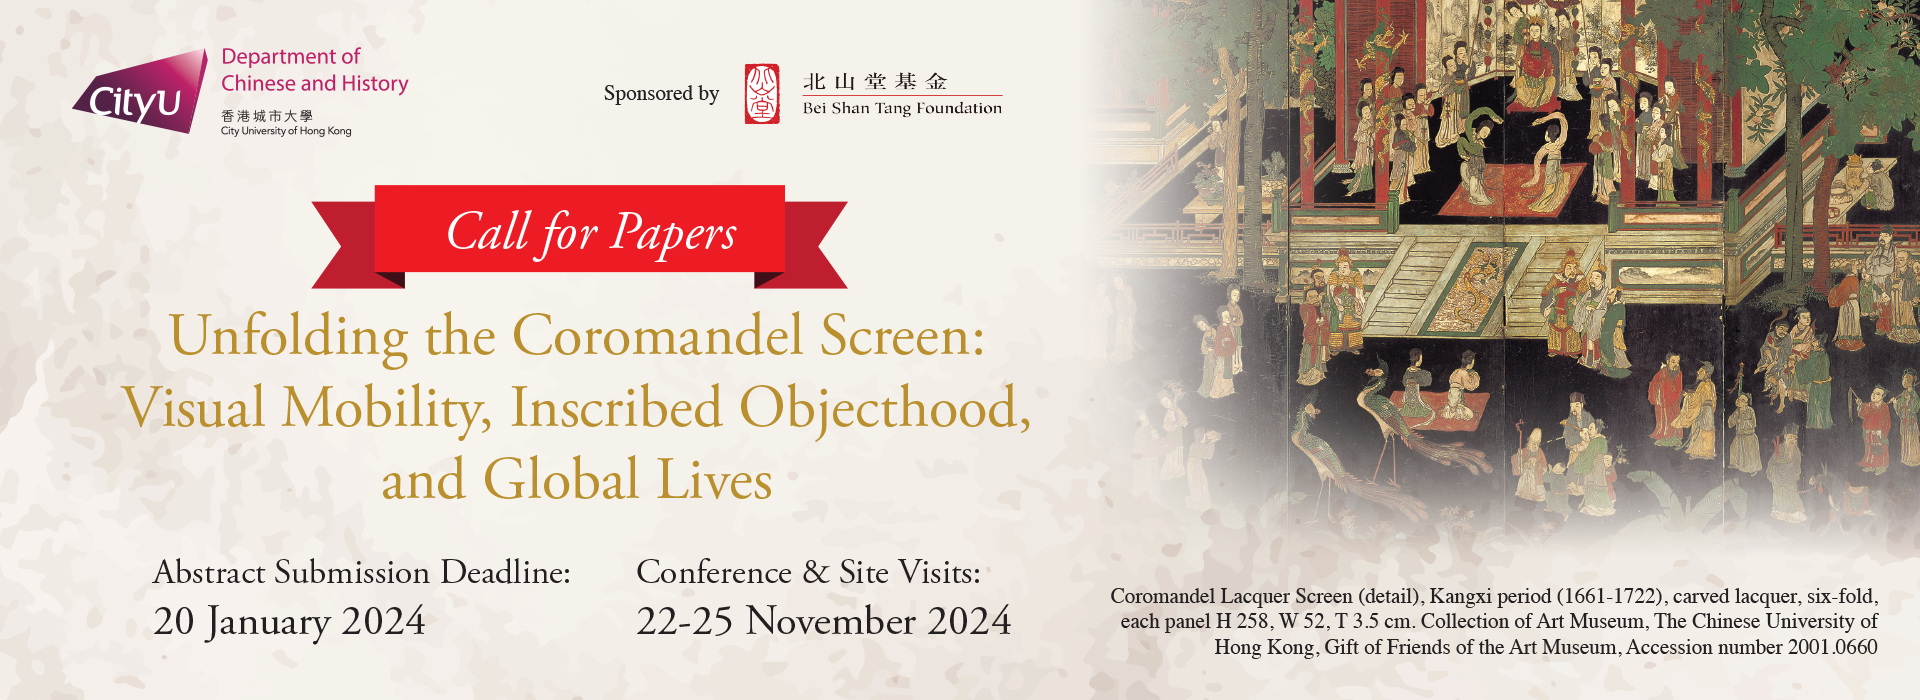 Call for Papers - Conference "Unfolding the Coromandel Screen: Visual Mobility, Inscribed Objecthood, and Global Lives"